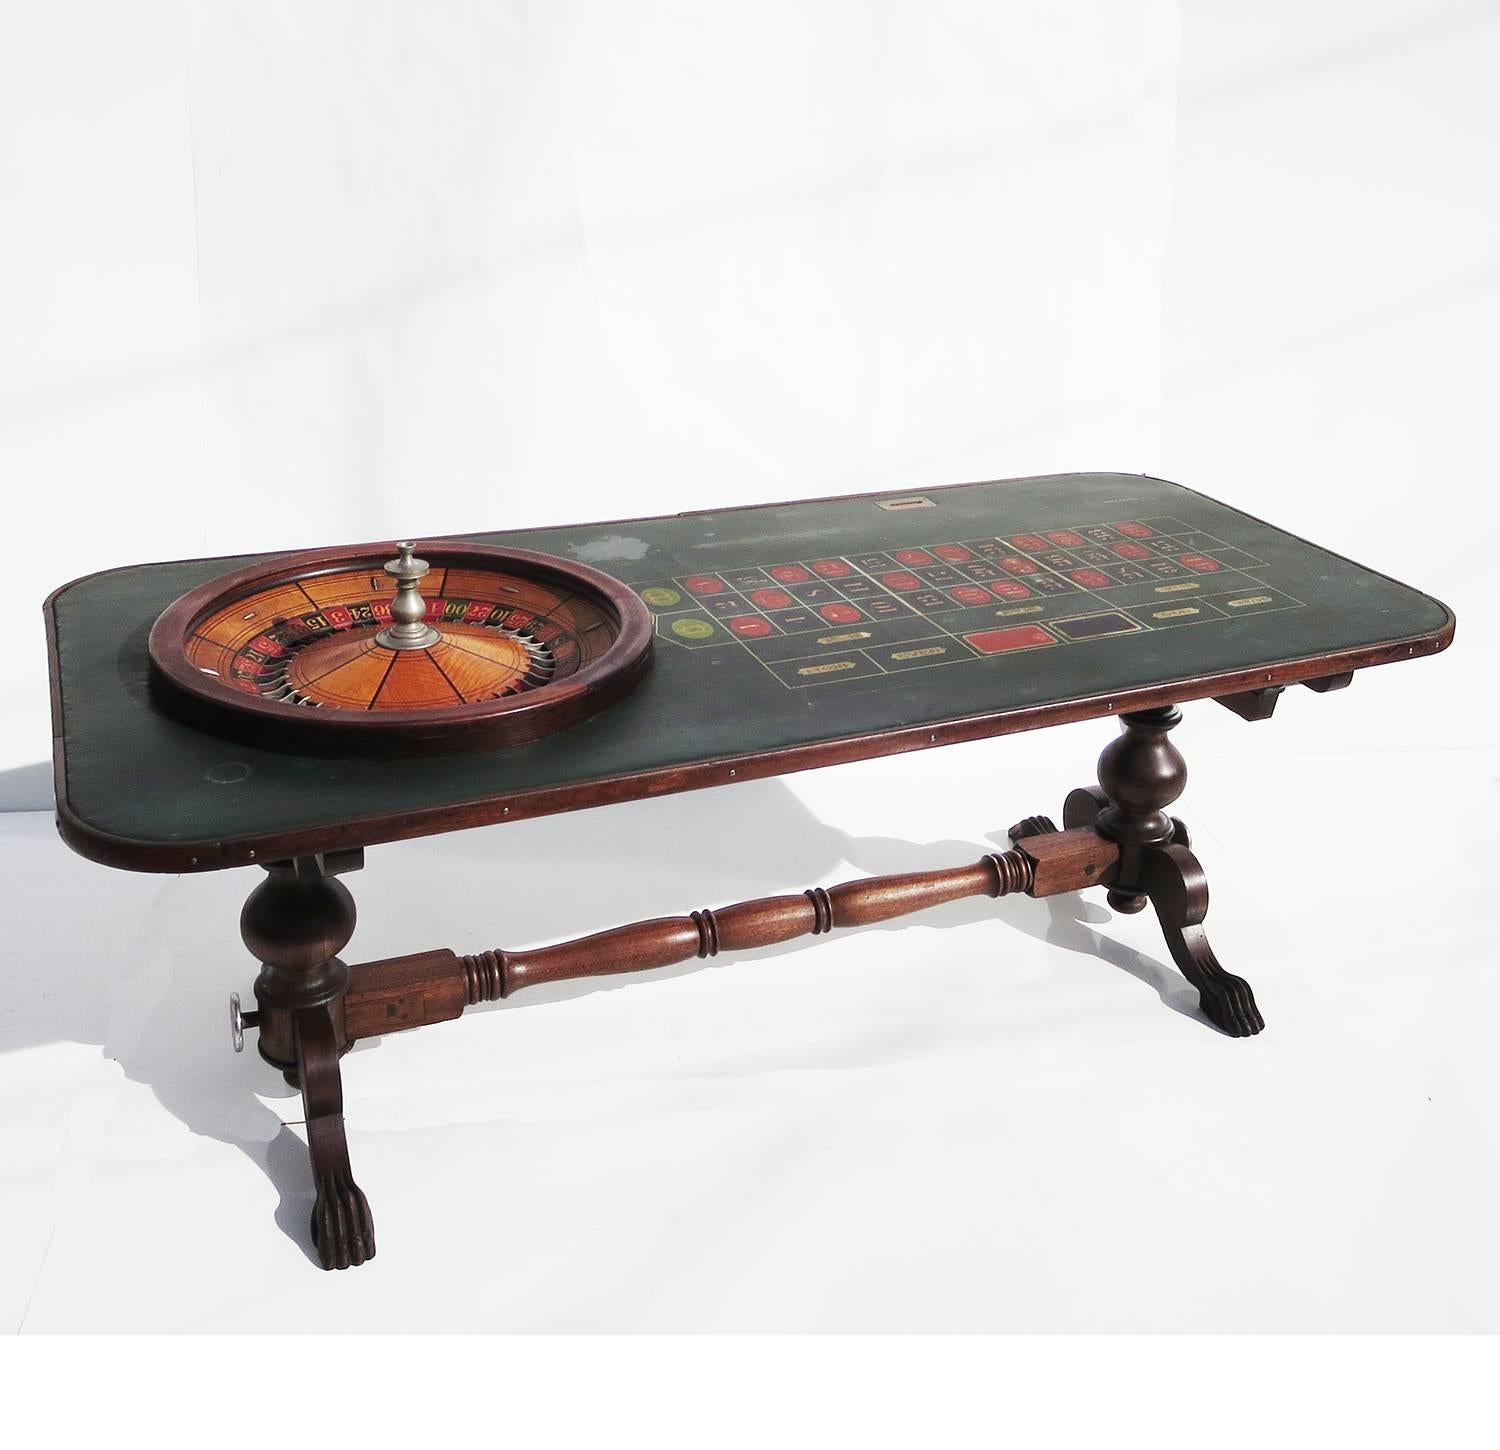 A fantastic example of an American turn of the century roulette table. Made by F. Grote and Co. of New York, the table features a very fine wheel of maple and rosewood, with a silvered center shaft. The playing surface is original oil cloth, rather